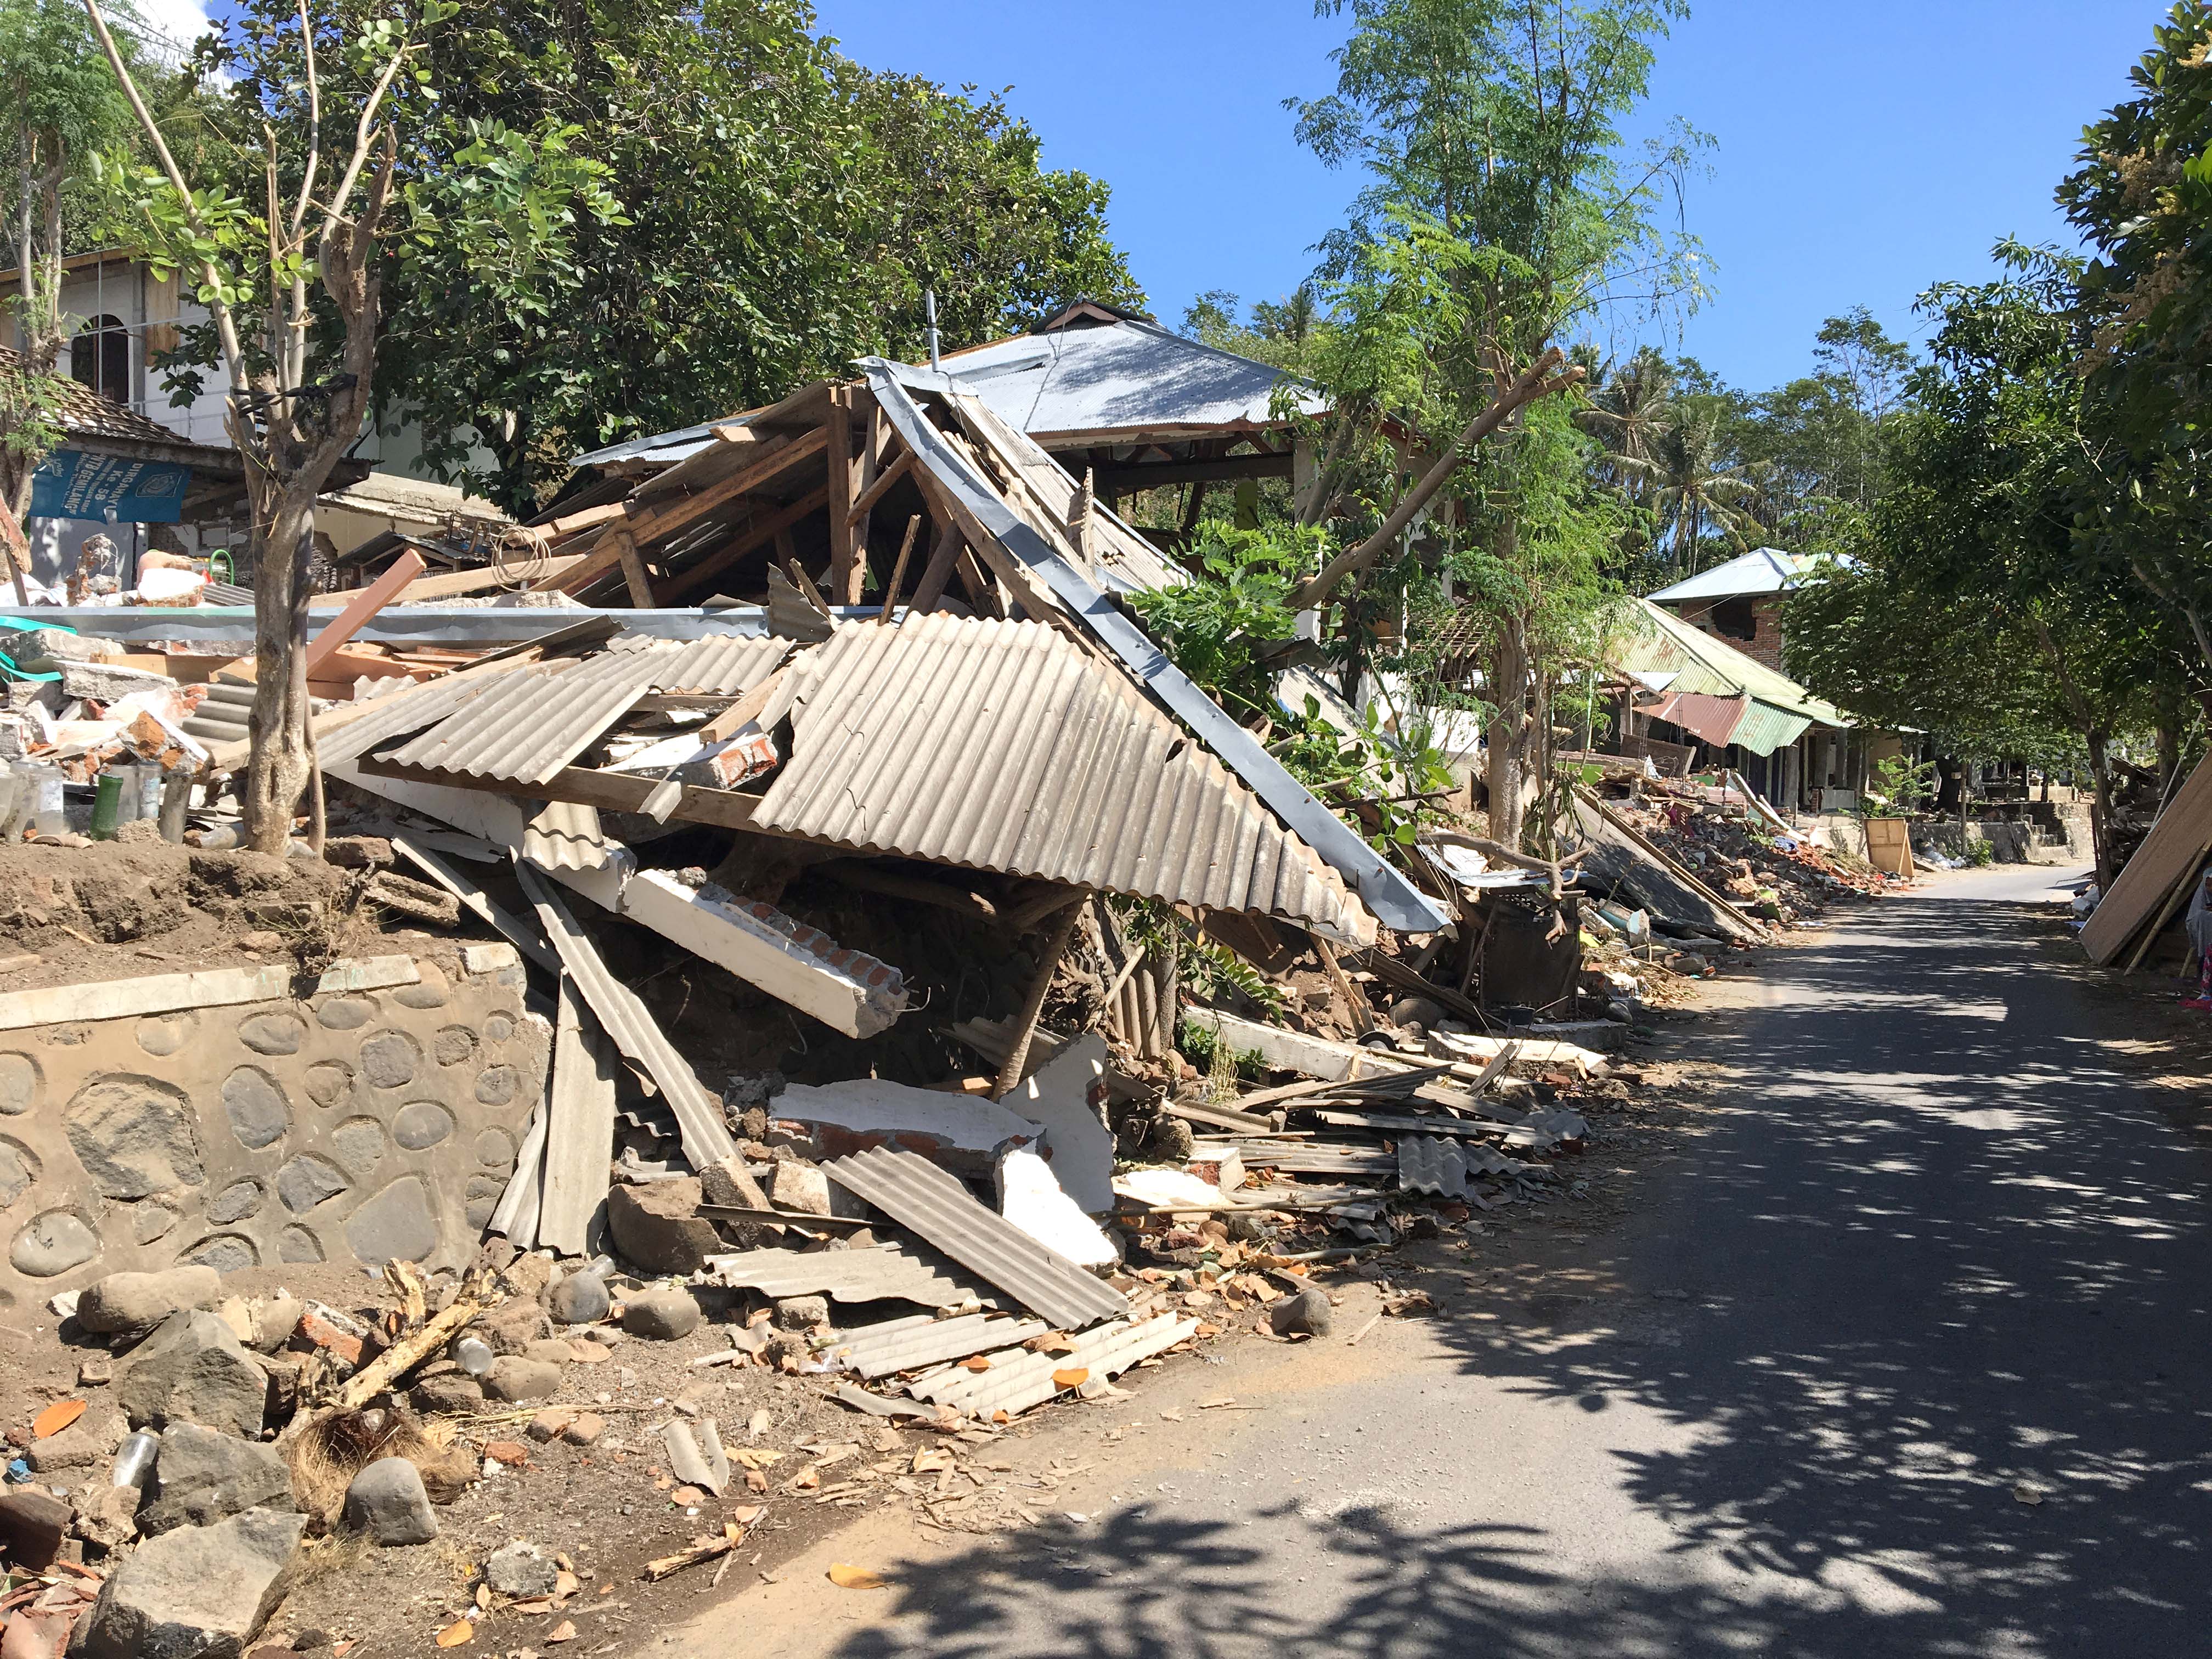 Lombok has been devastated by a chain of terrifying earthquakes